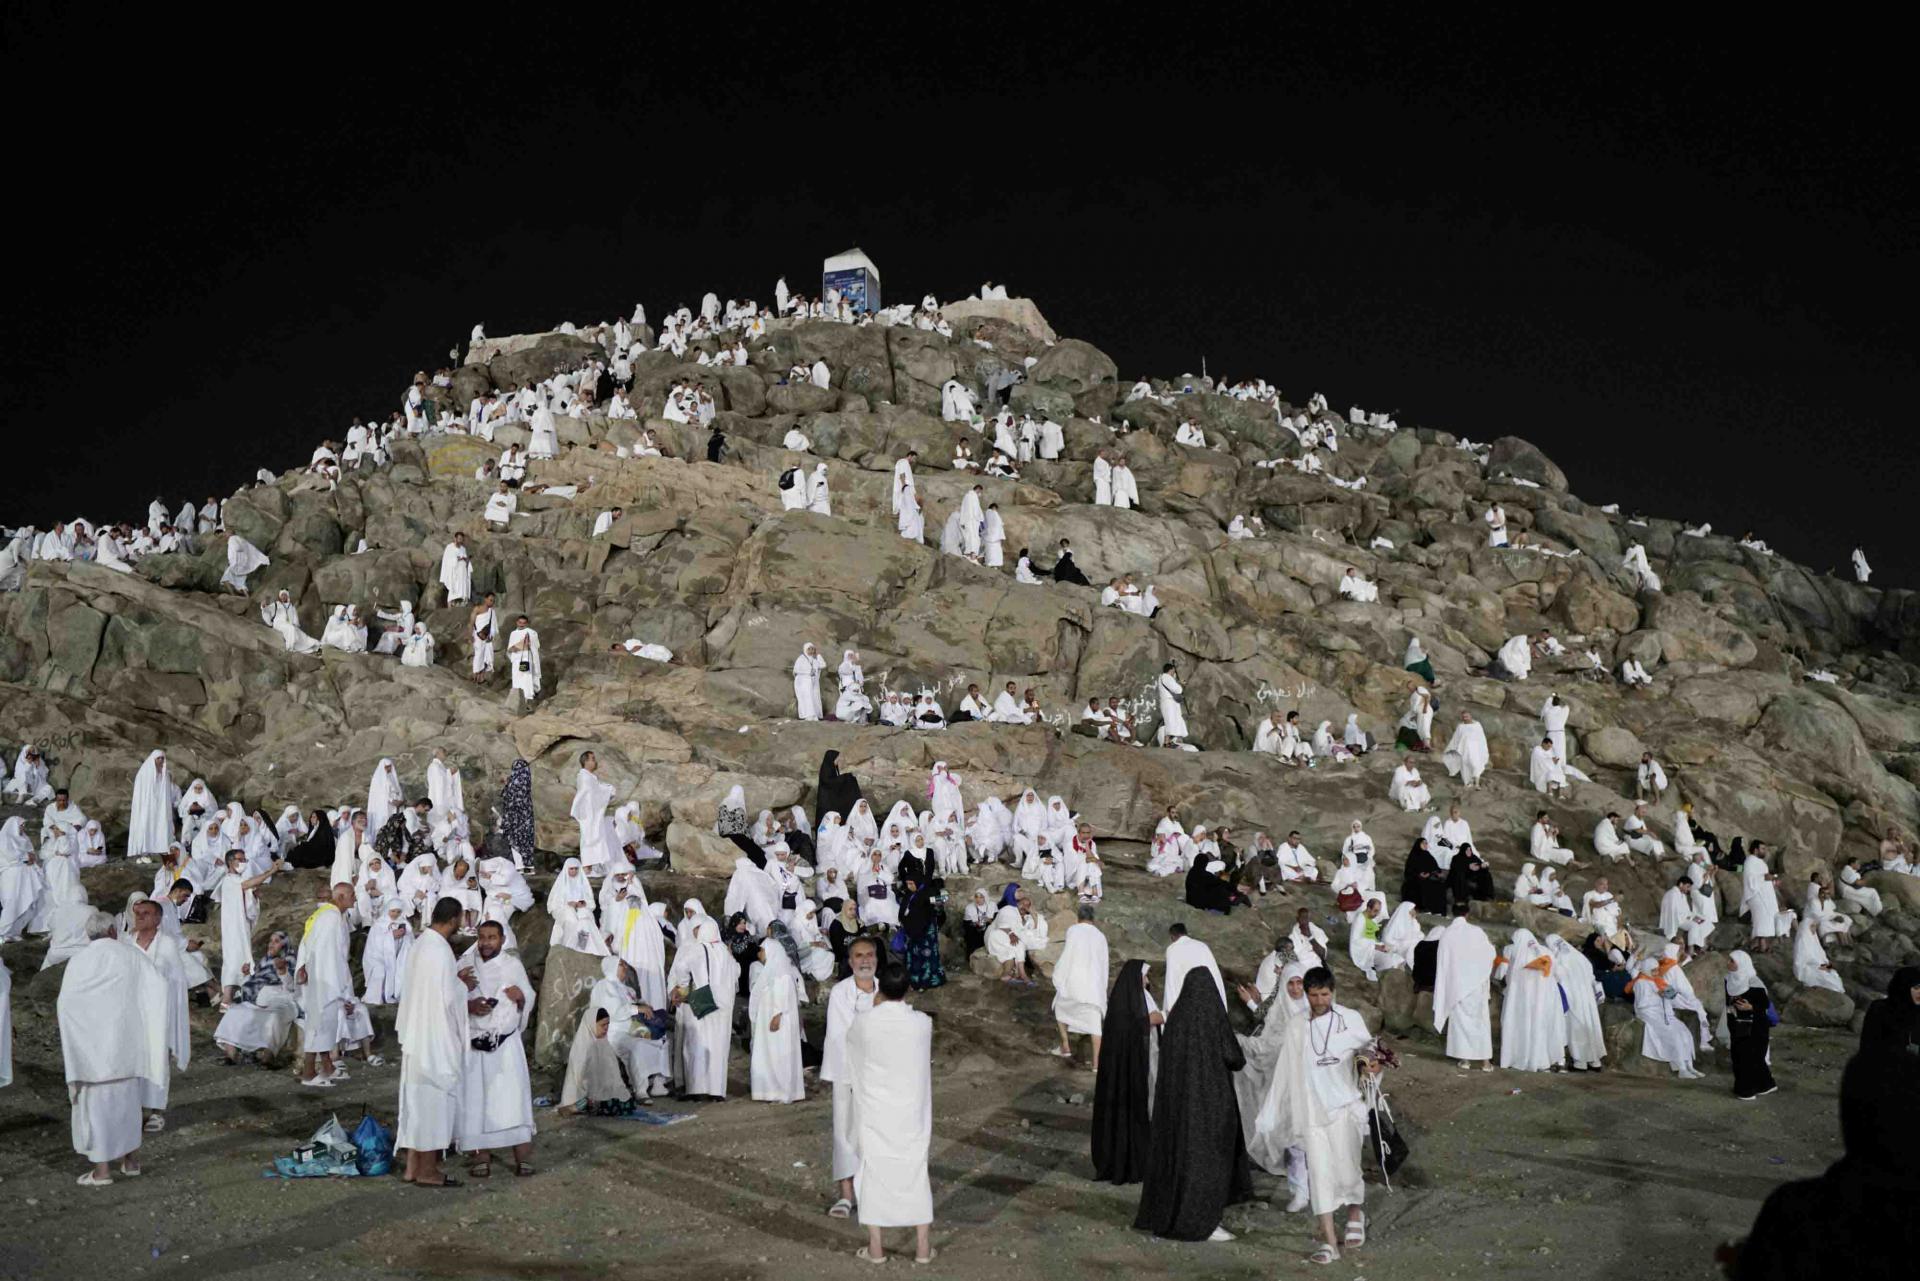 Pilgrims travelling from abroad account for 1.86 million of the 2.48 million taking part in this year's hajj